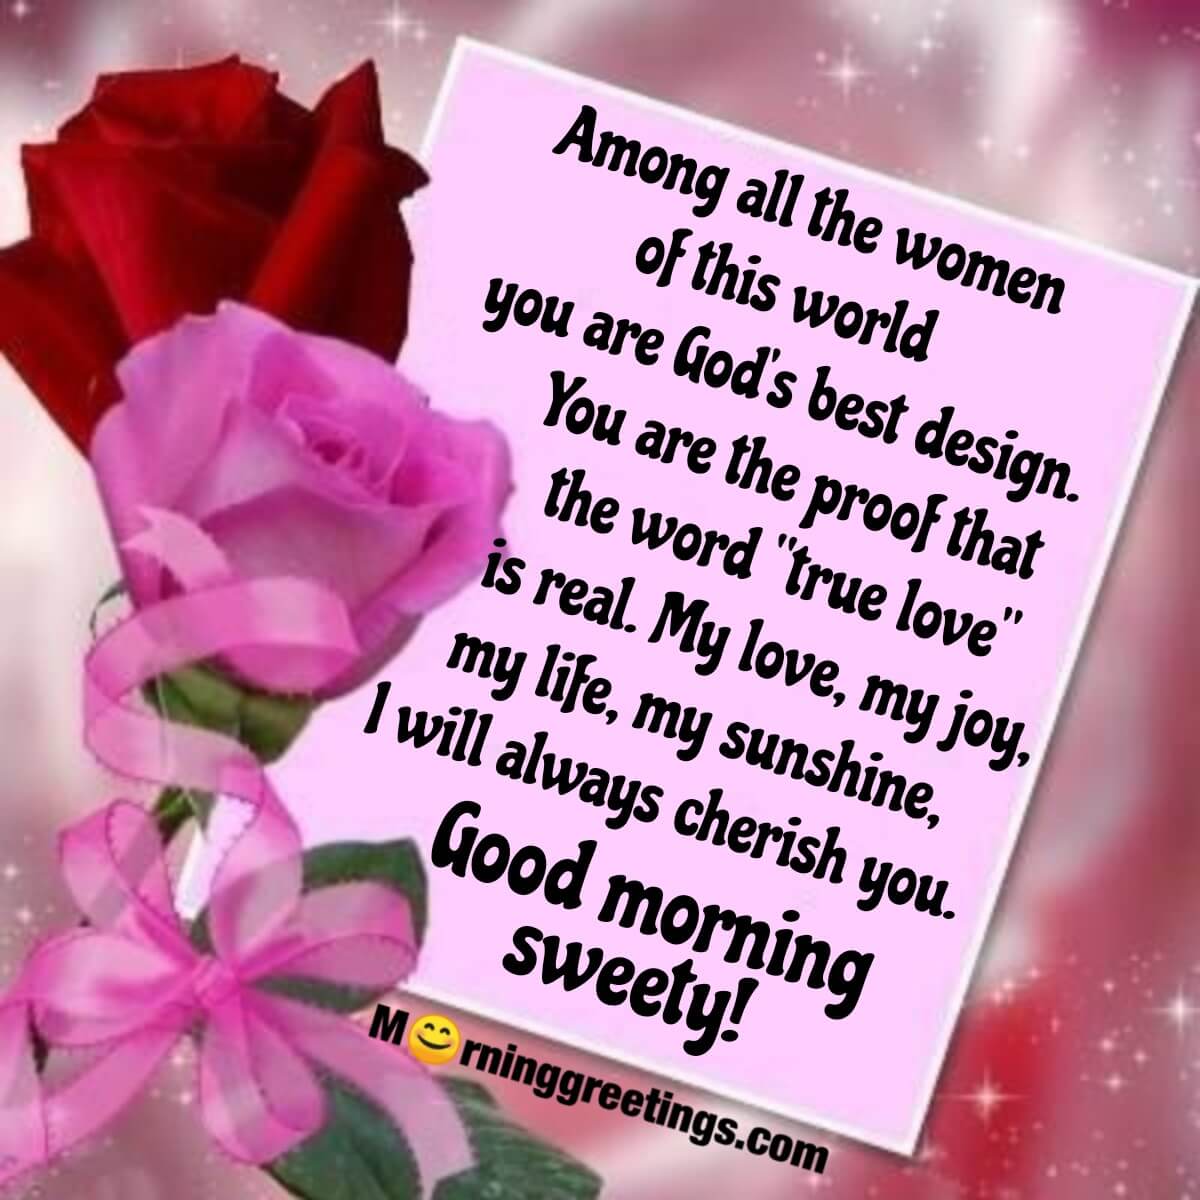 25 Good Morning Wishes Quotes For Her - Morning Greetings ...